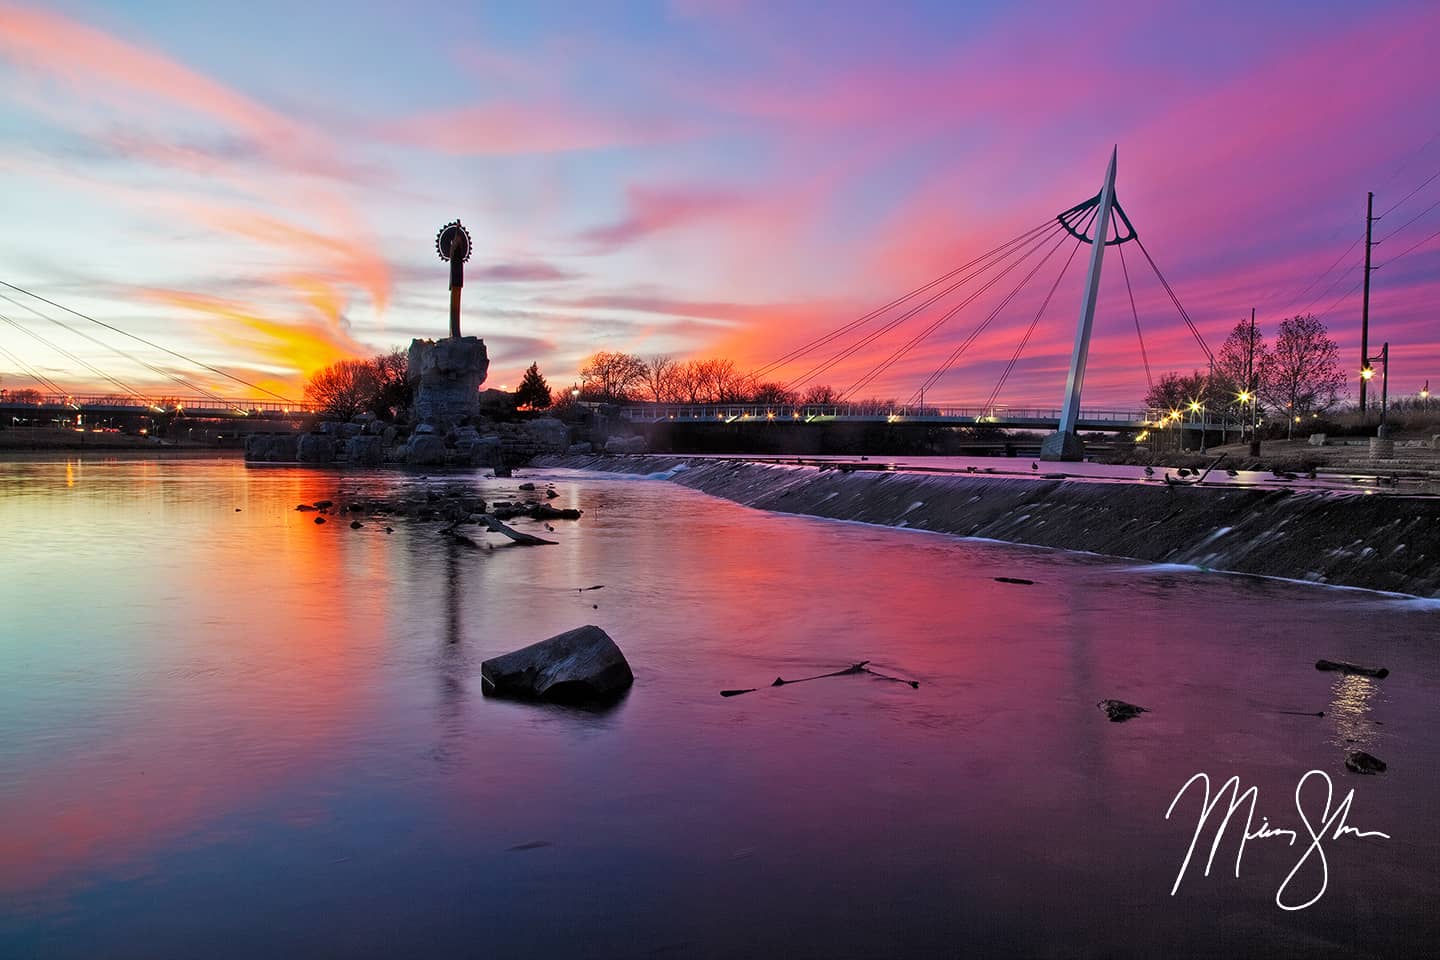 Fire and Ice at the Keeper of the Plains - Keeper of the Plains, Wichita, Kansas